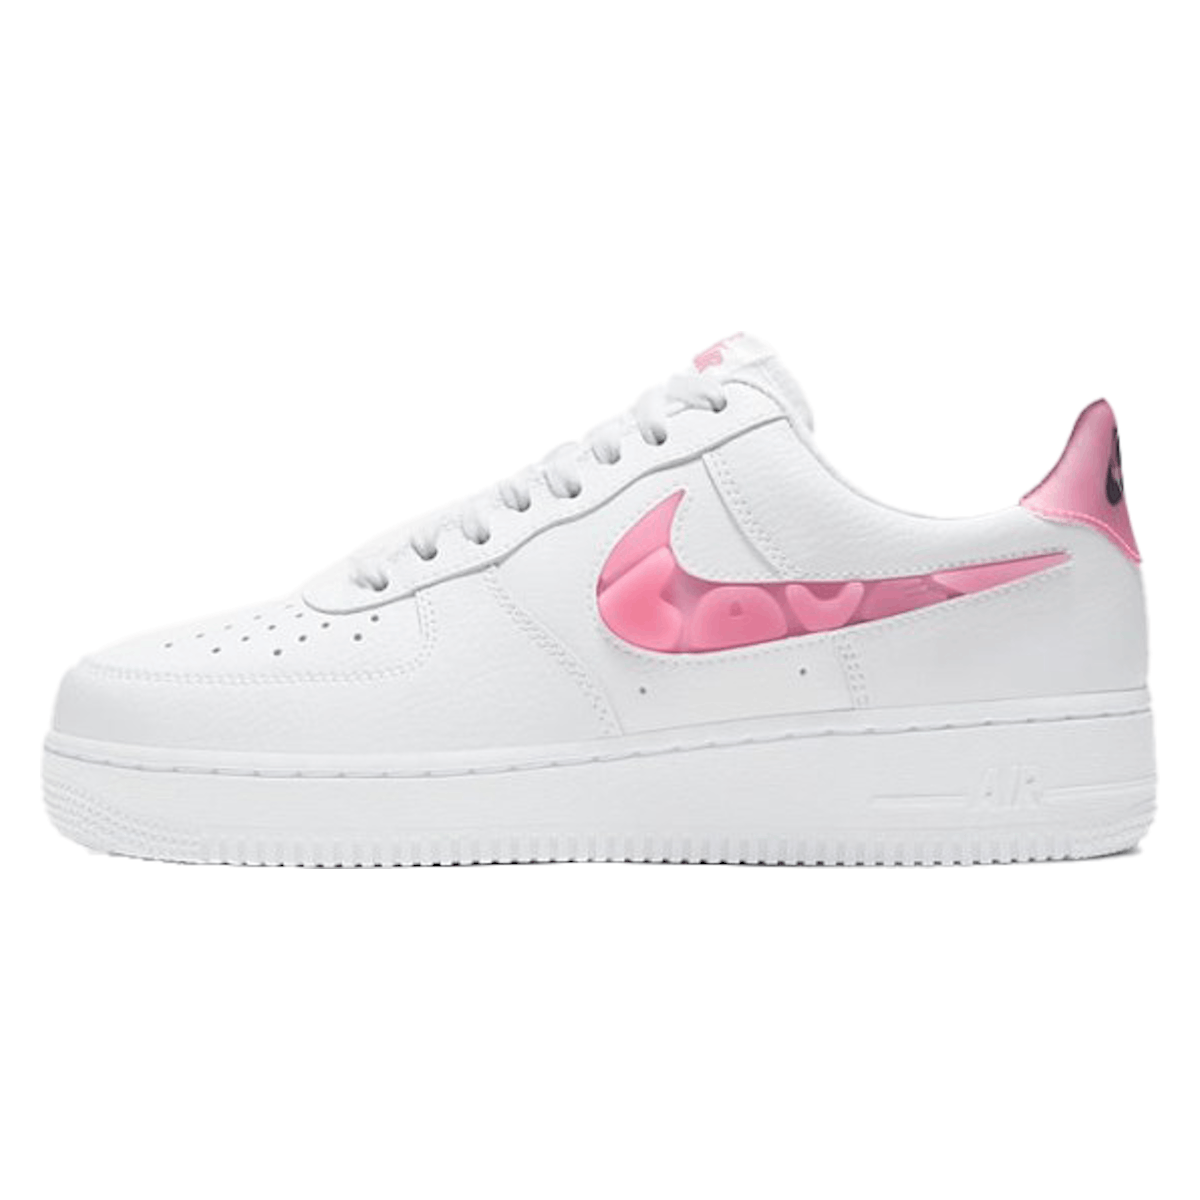 Nike Air Force 1 '07 Low SE "Love For All"